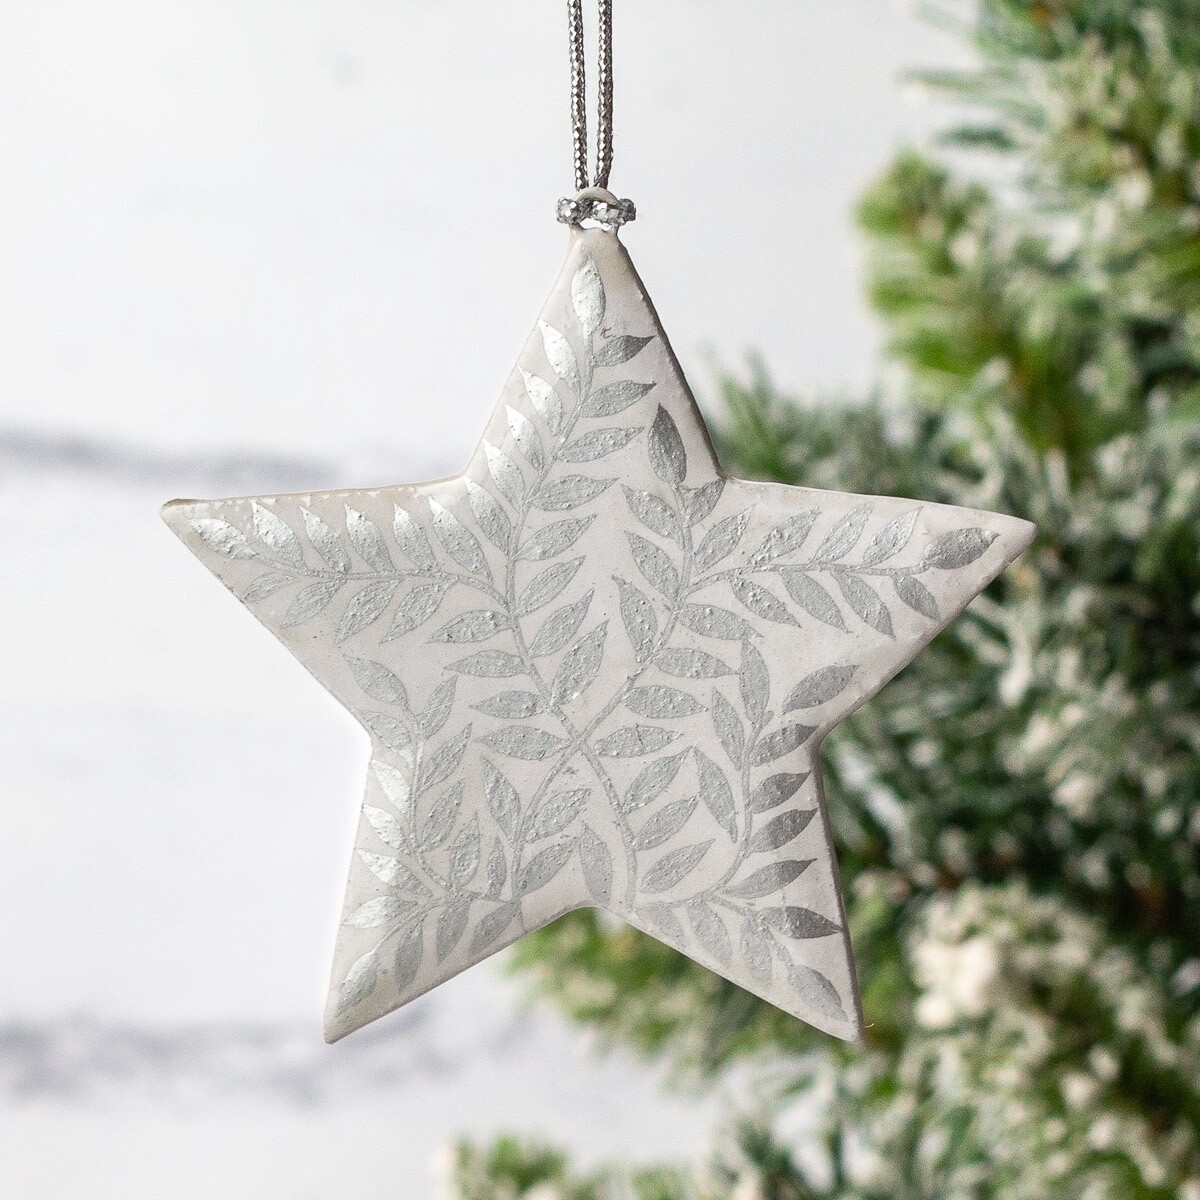 Hand Painted Papier Mâché Star Decoration - White Leaves on Silver Small by Fair to Trade